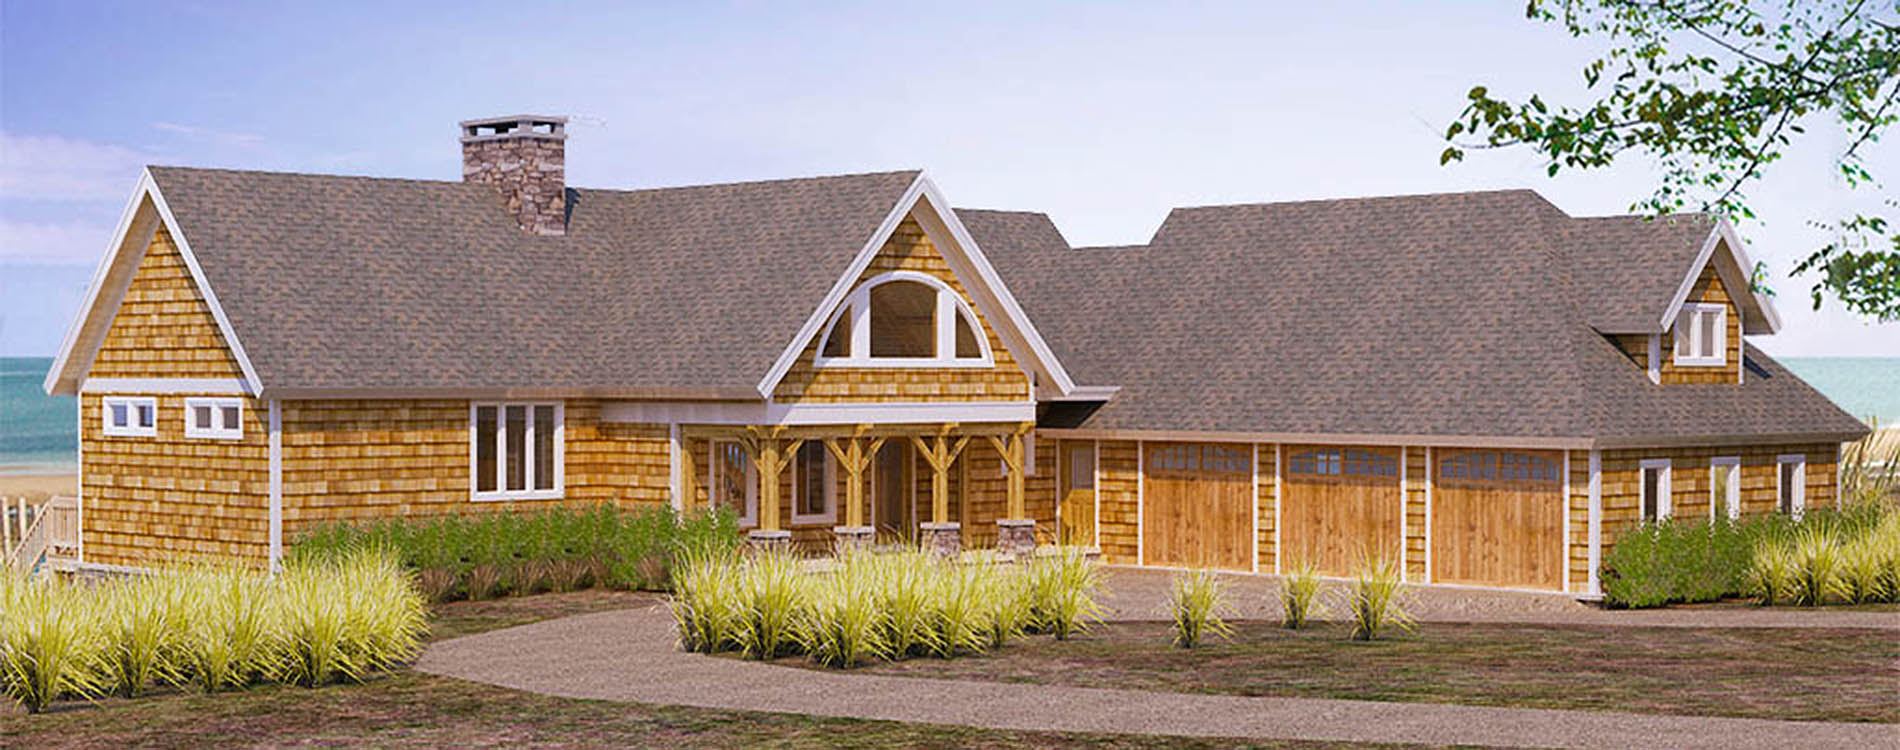 Coastal Timber Frame Home Plan by Woodhouse